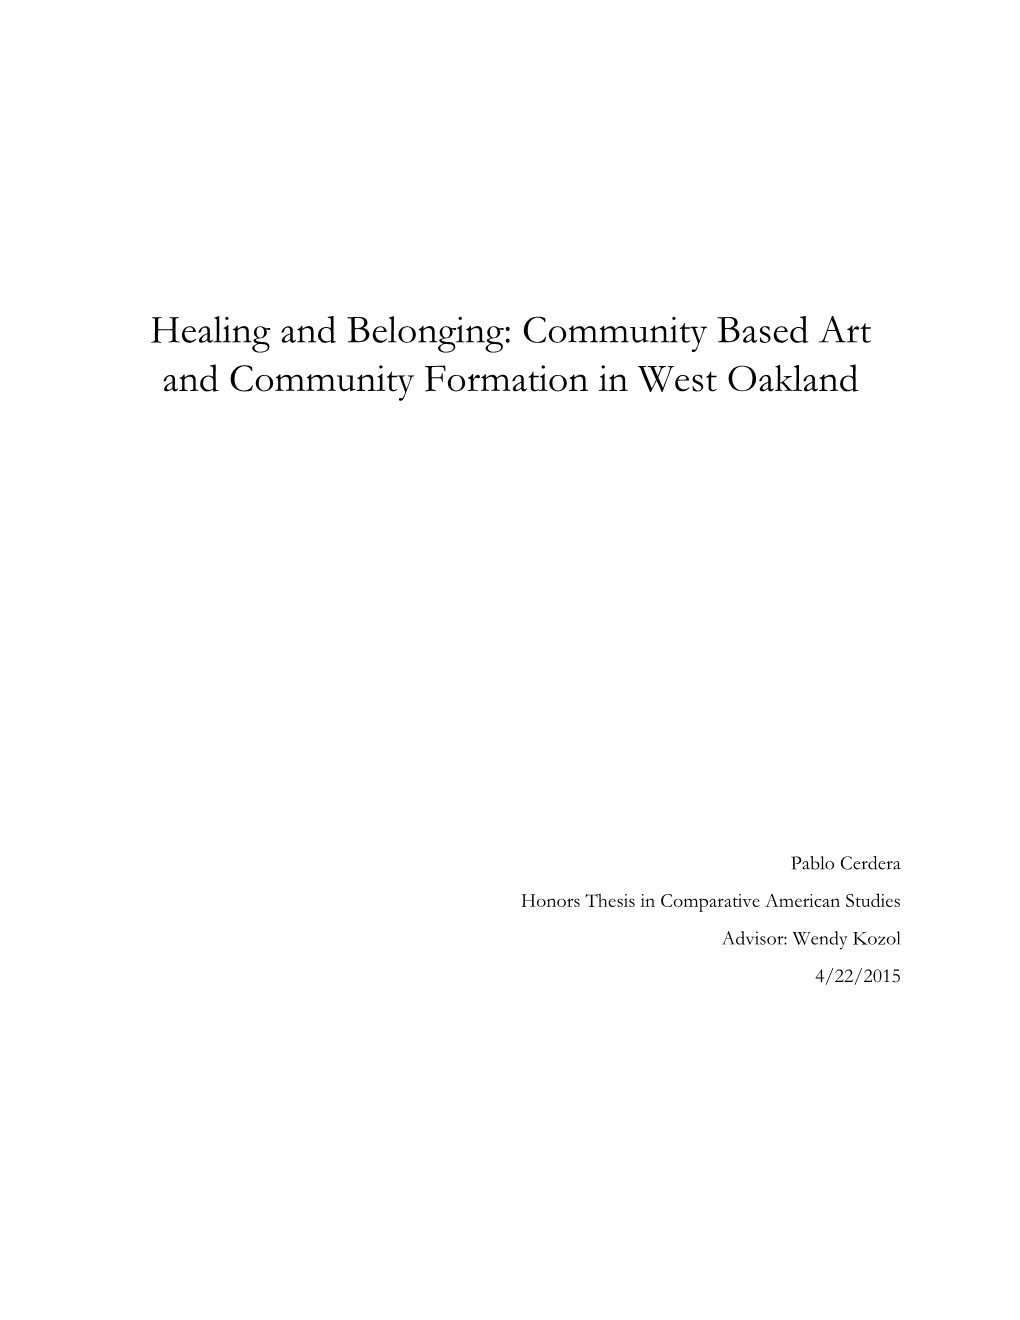 Healing and Belonging: Community Based Art and Community Formation in West Oakland